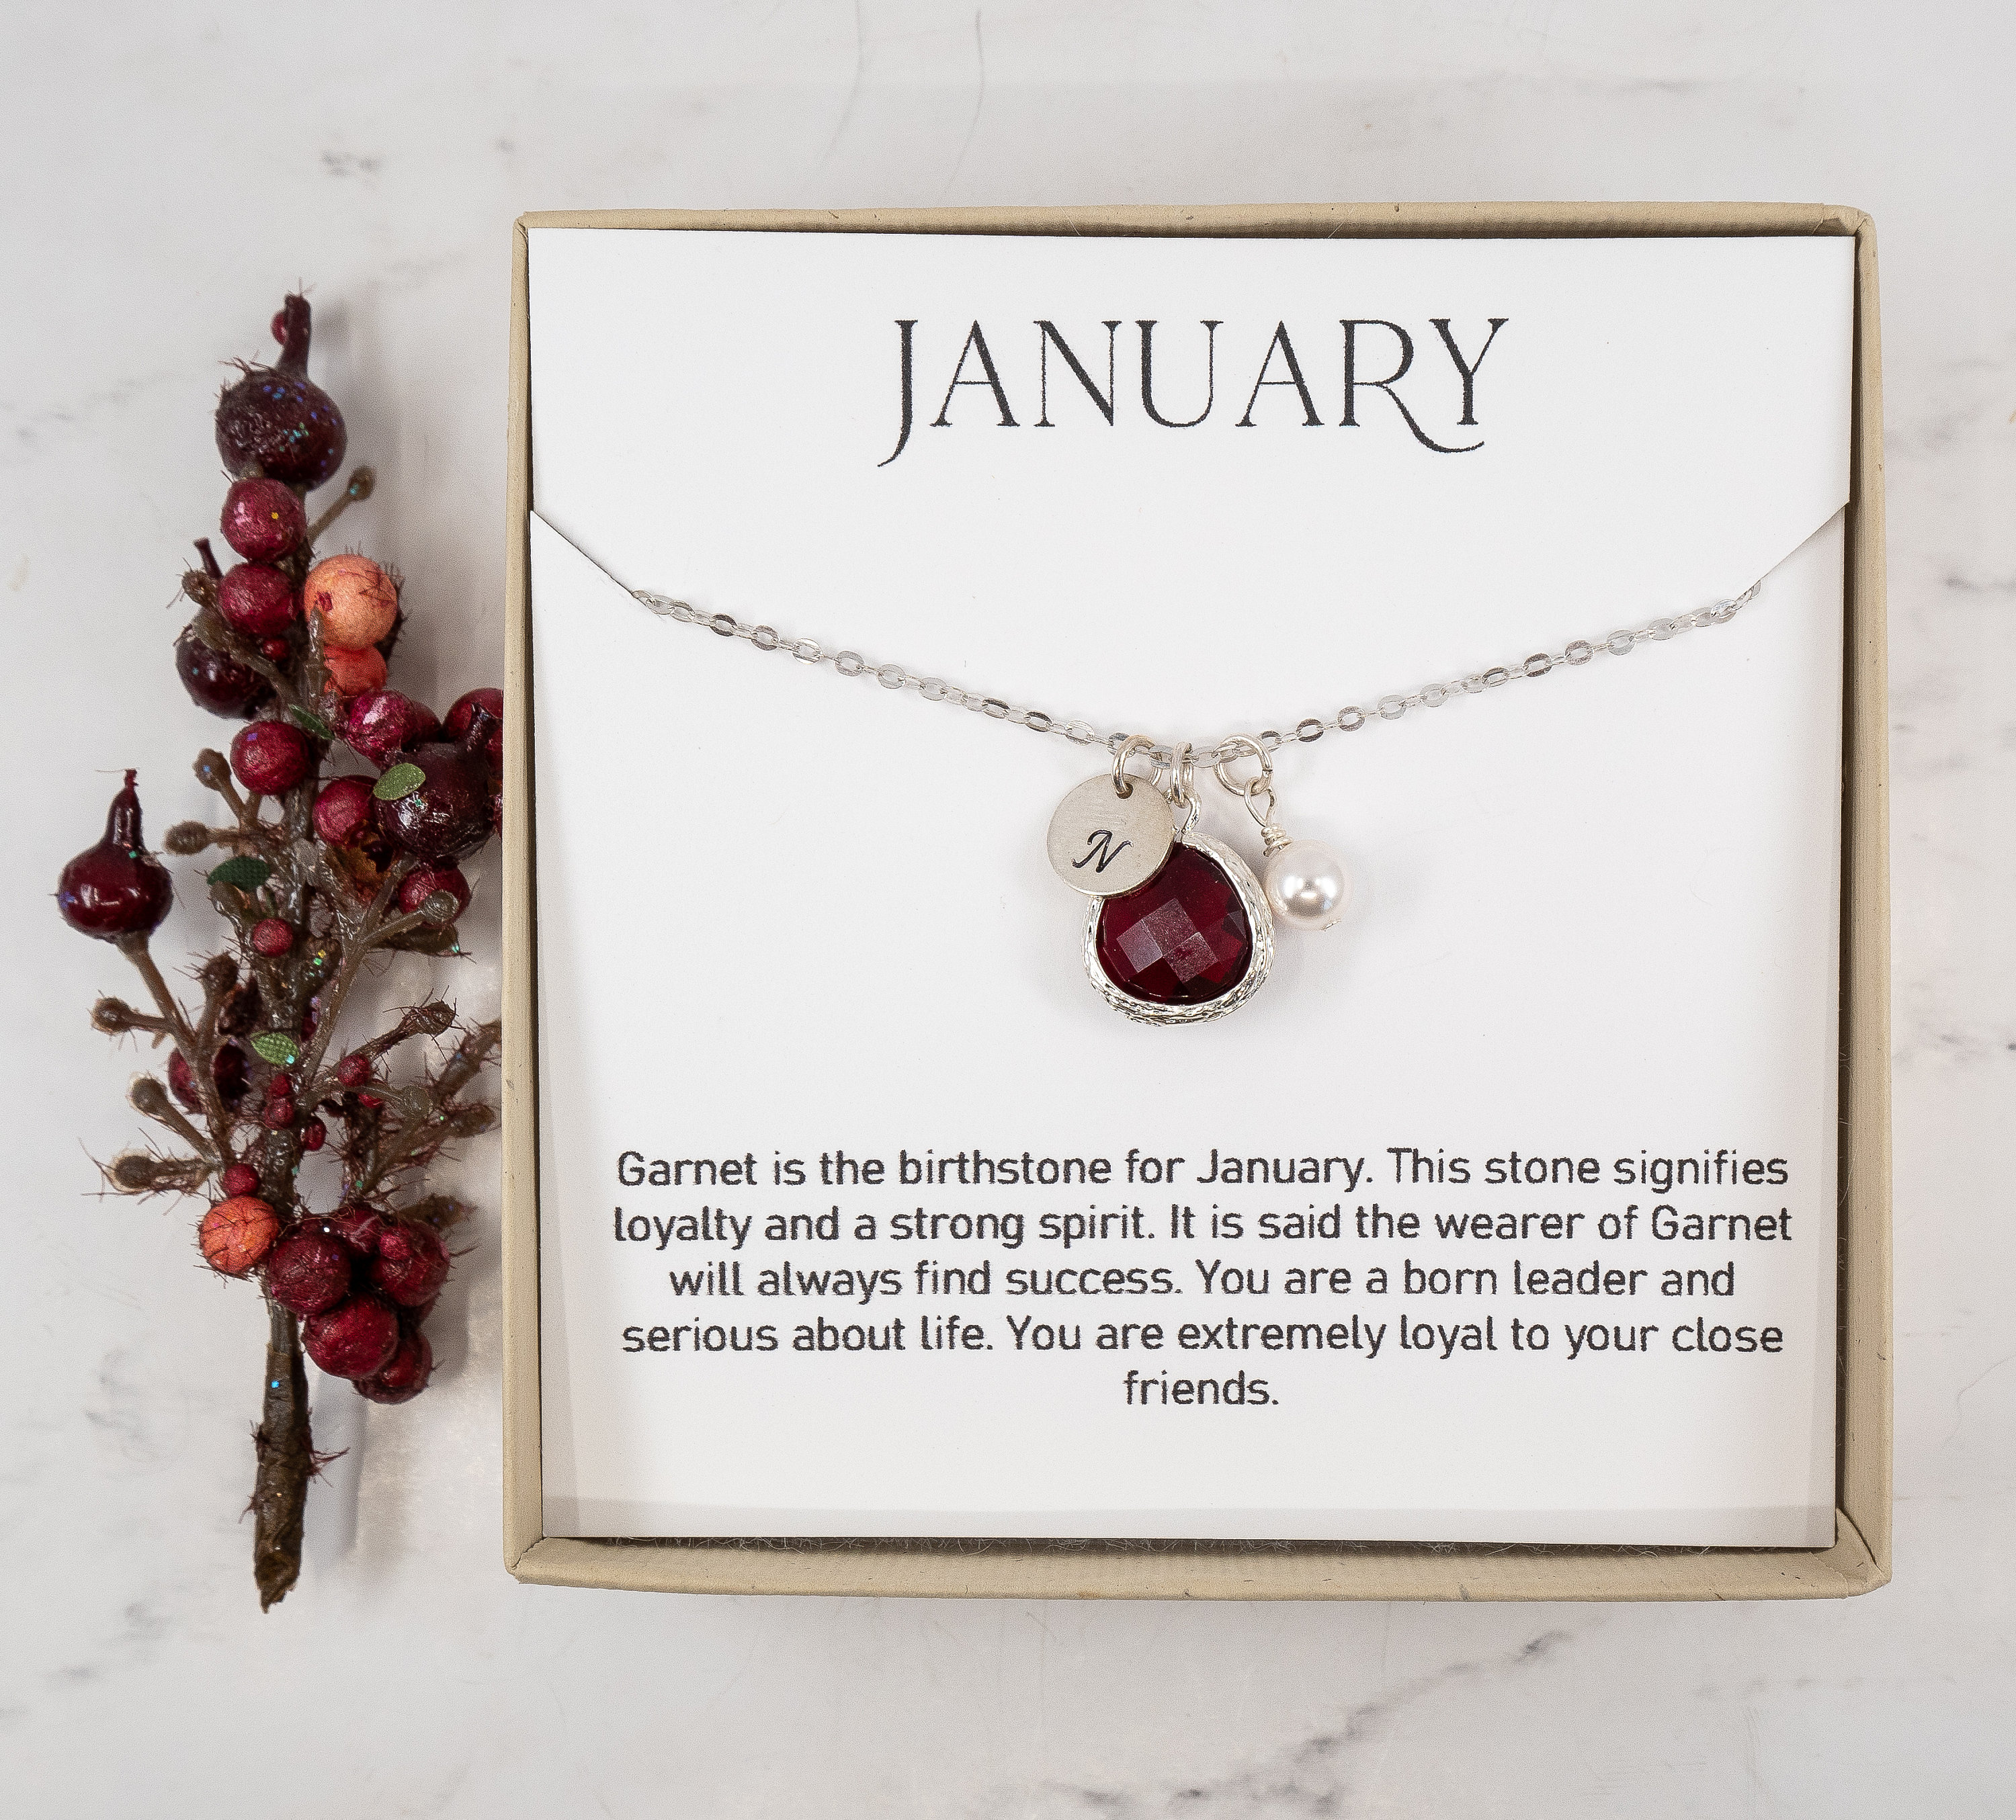 Birthday Gifts for Women January Birthstone Necklace Garnet I Love You to the Moon and Back Necklace Blue Sapphire Peridot Citrine Pink Tourmaline and More Stones Sterling Silver Jewelry